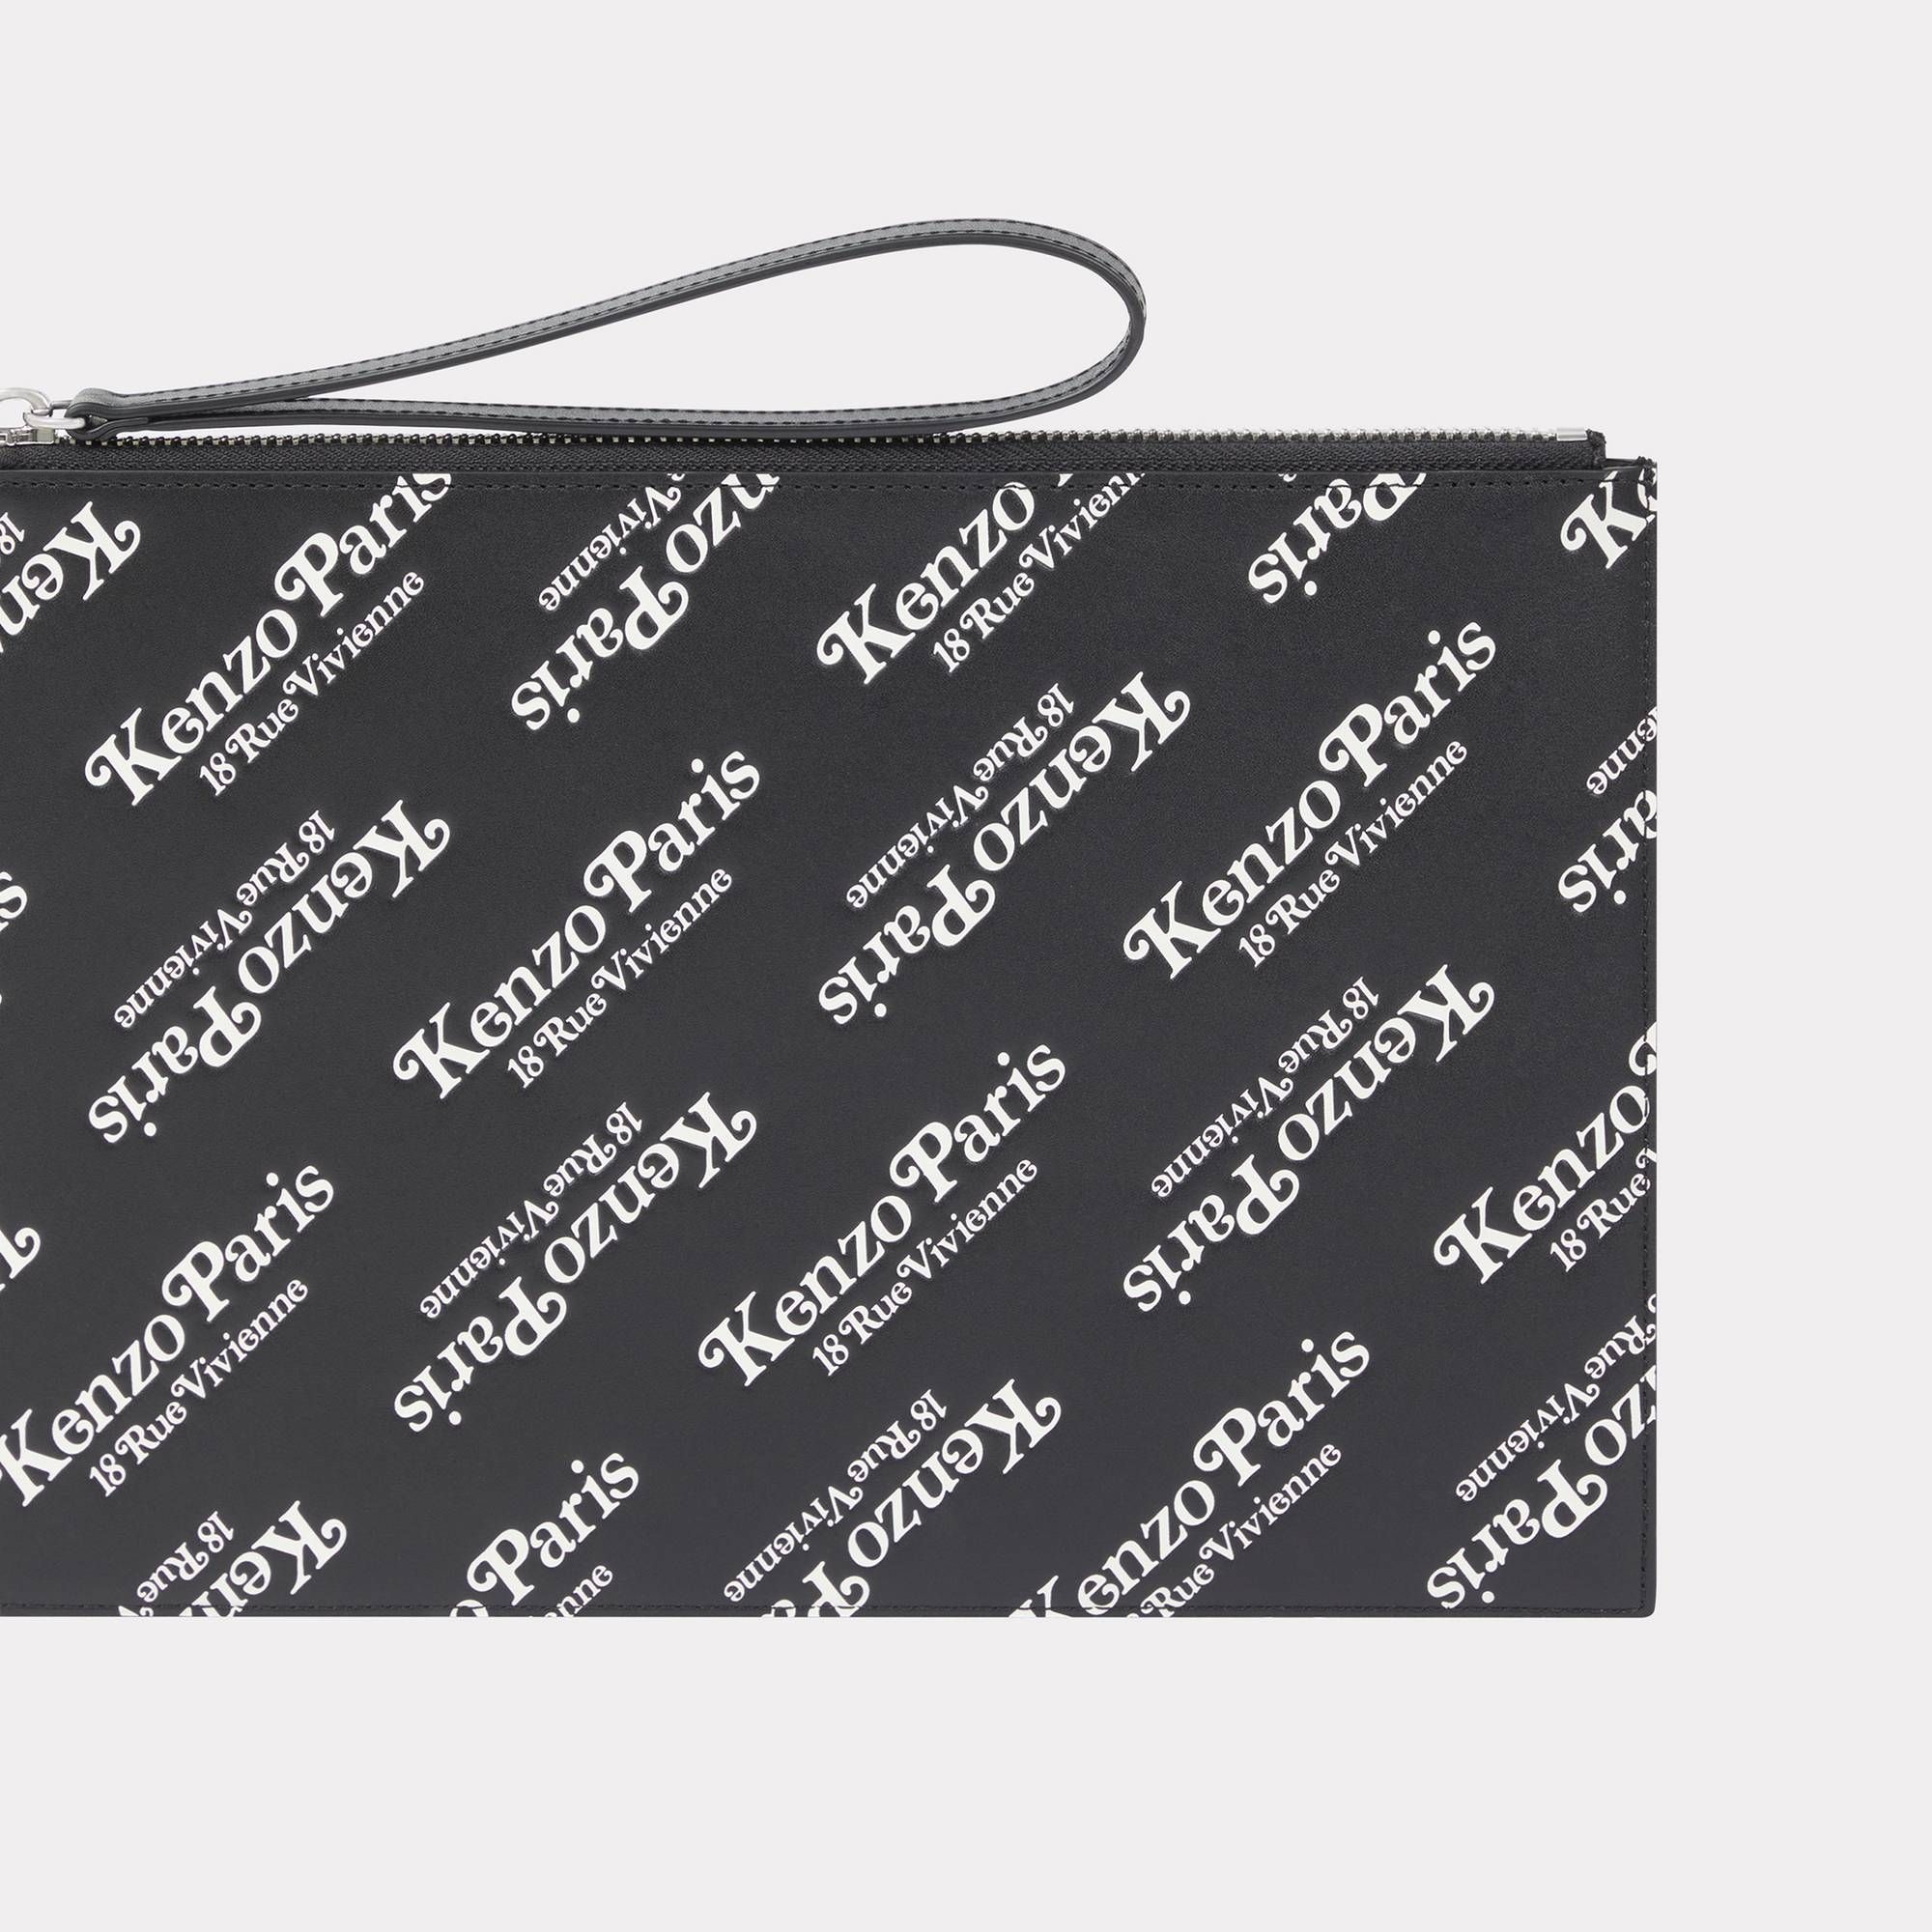  'KENZOGRAM' Large Leather Pouch - Black 